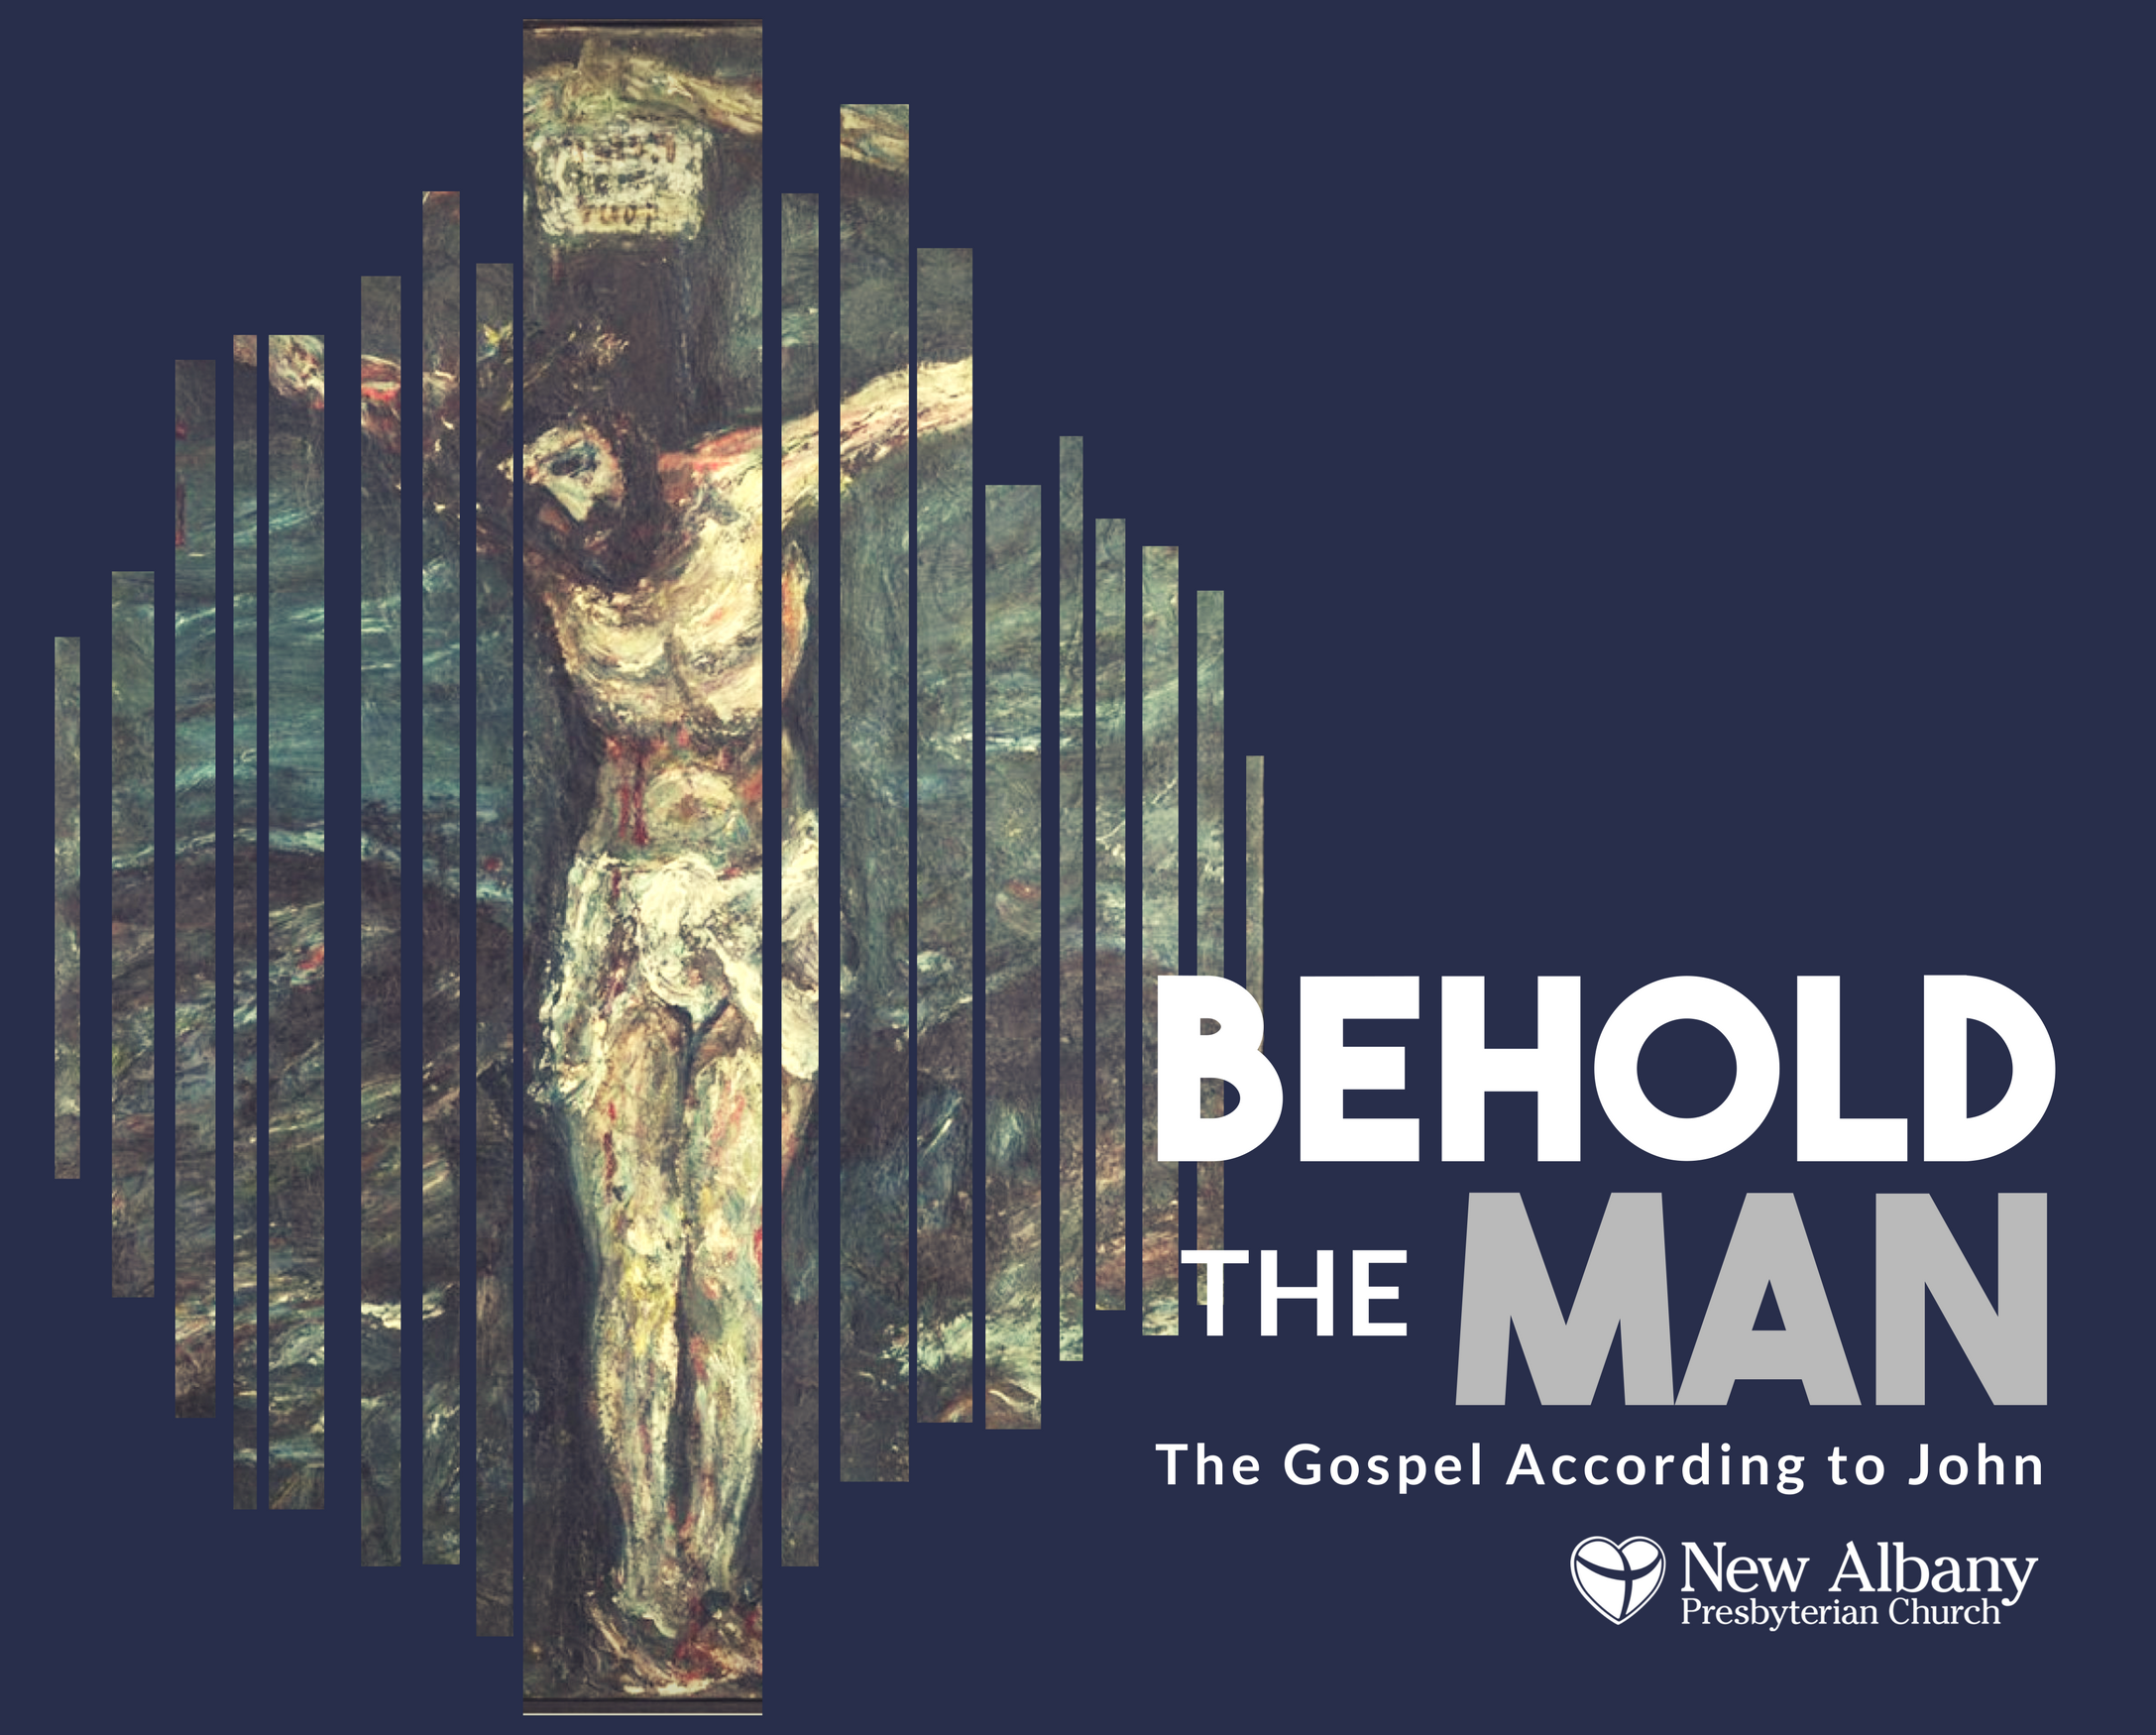 Behold the Man: Jesus the Light of the World